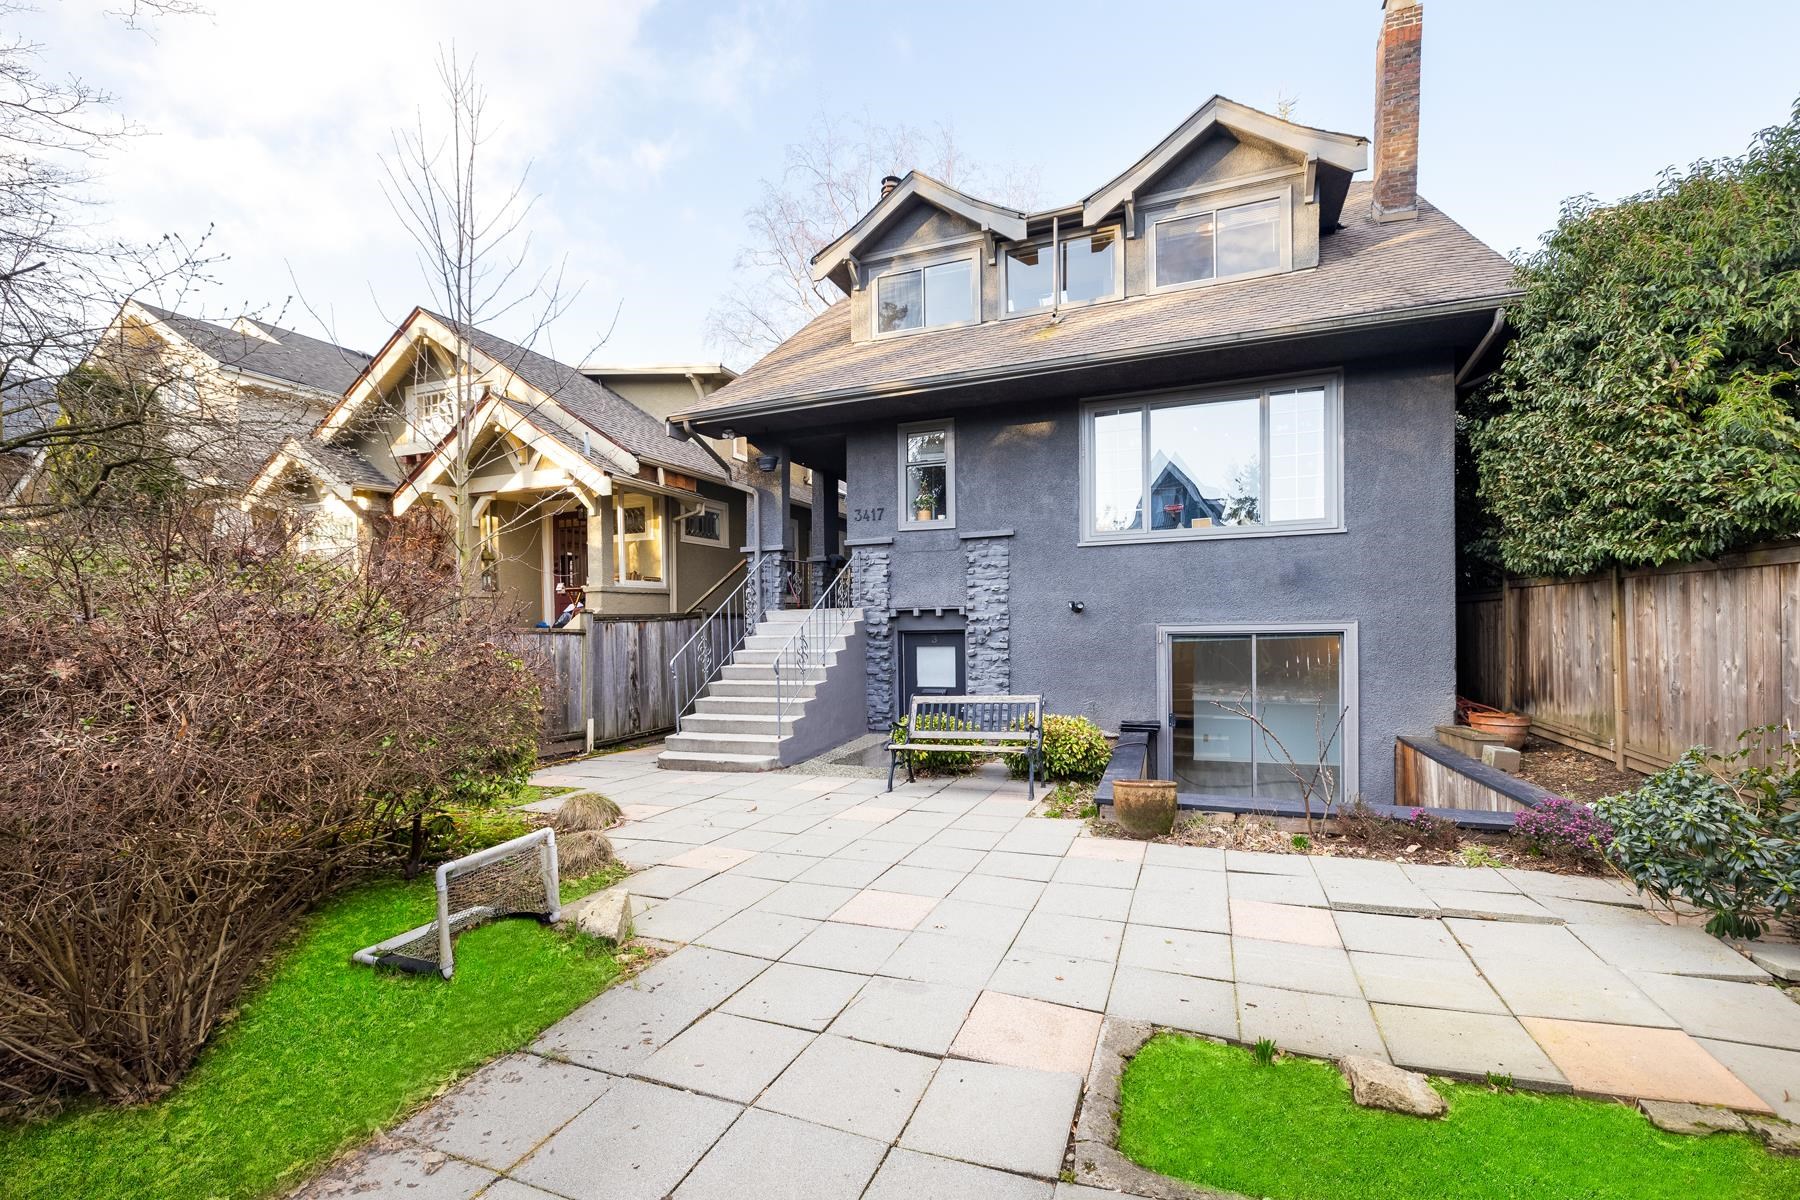 Listing image of 3417 W 2ND AVENUE